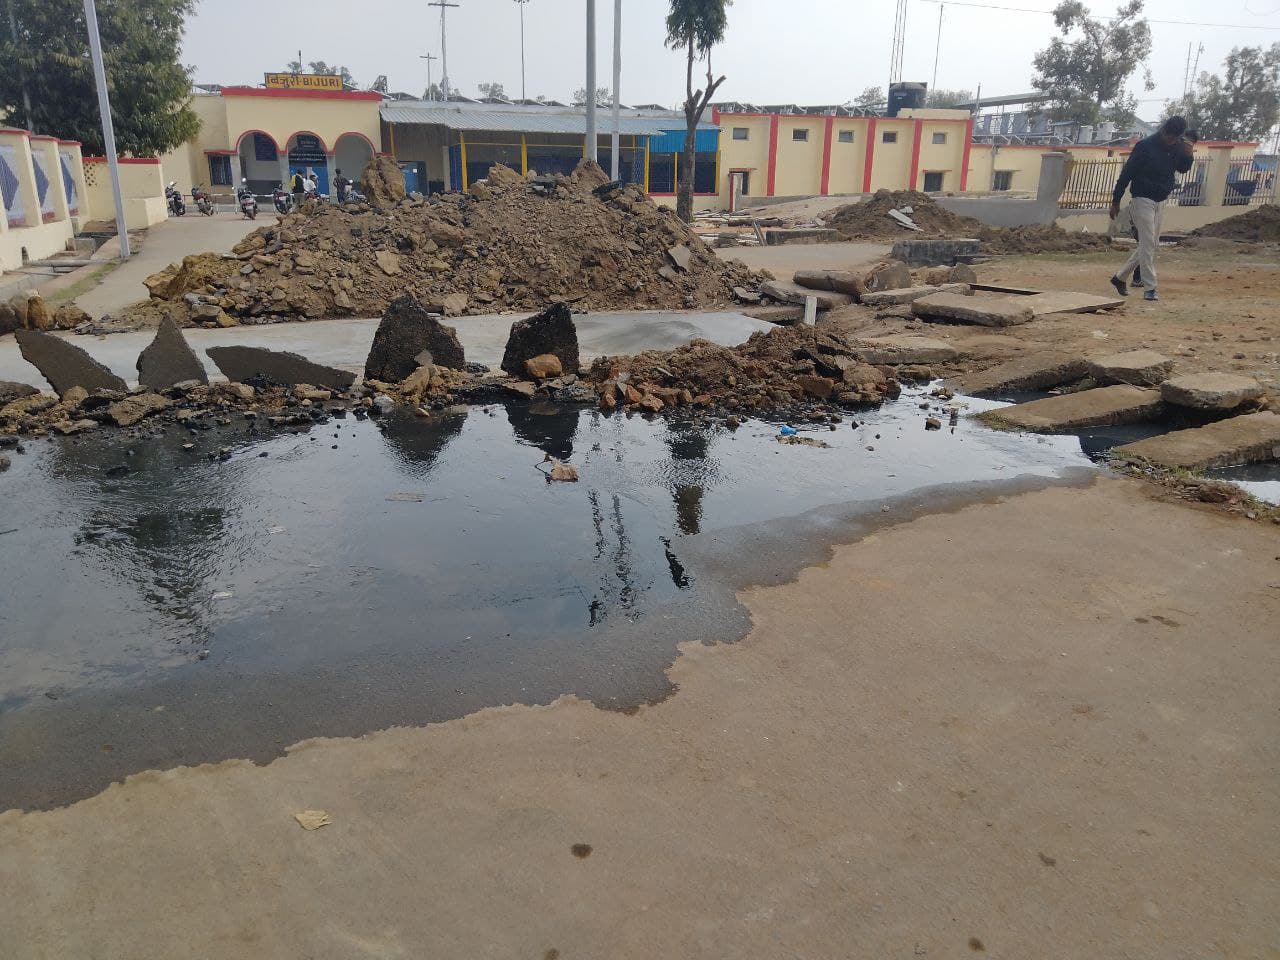 Dirty water flowing in front of the station, the nearby traders upset